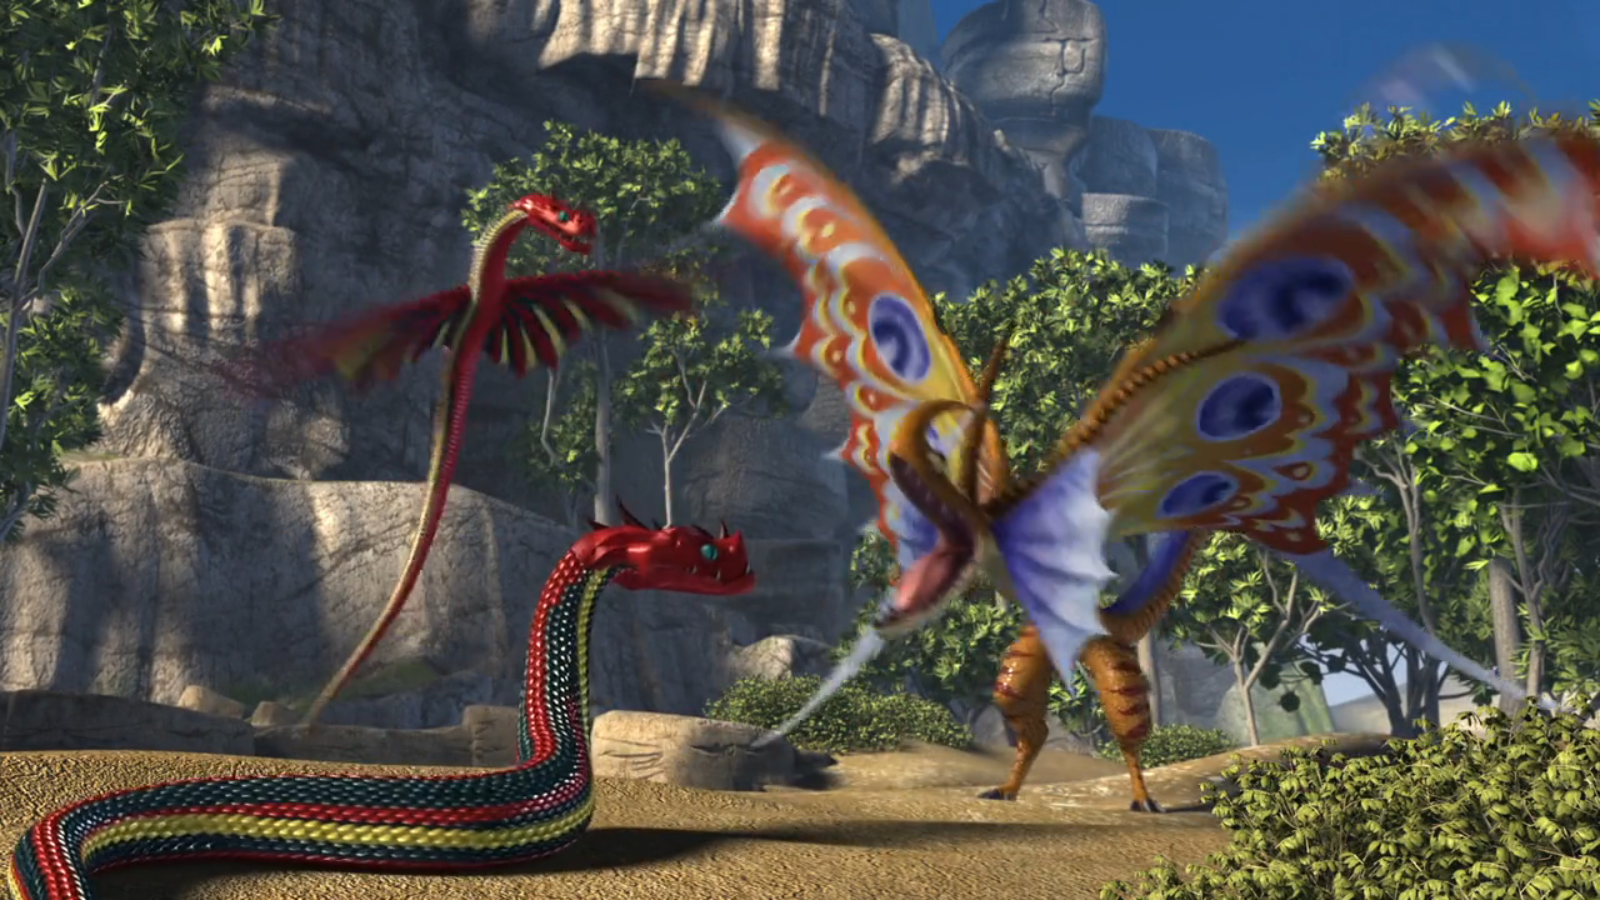 Download Image - Slitherwing 120.png | How to Train Your Dragon ...